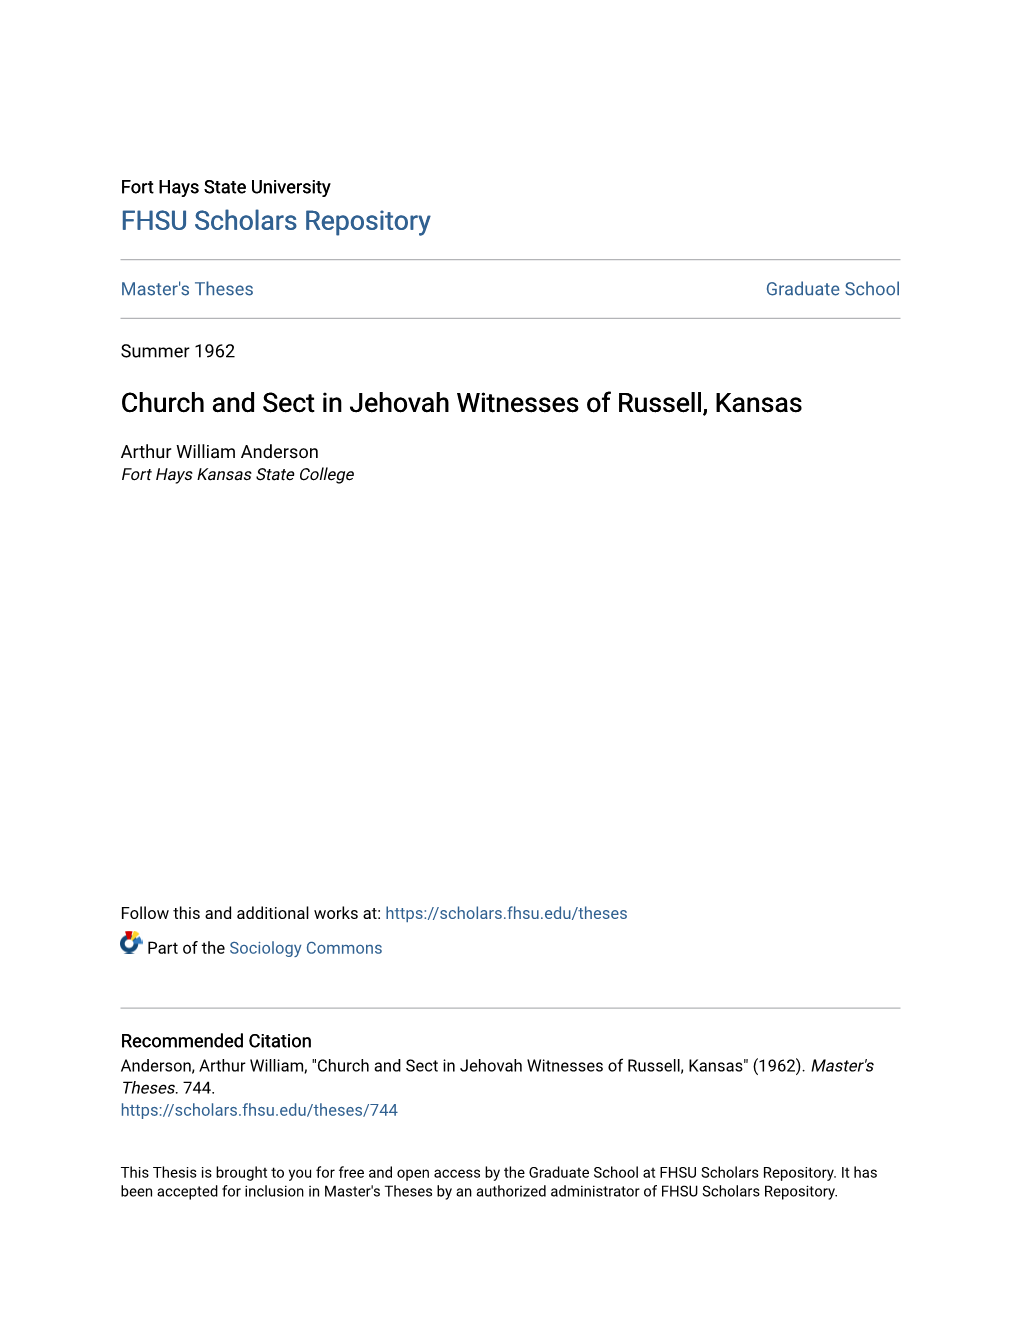 Church and Sect in Jehovah Witnesses of Russell, Kansas